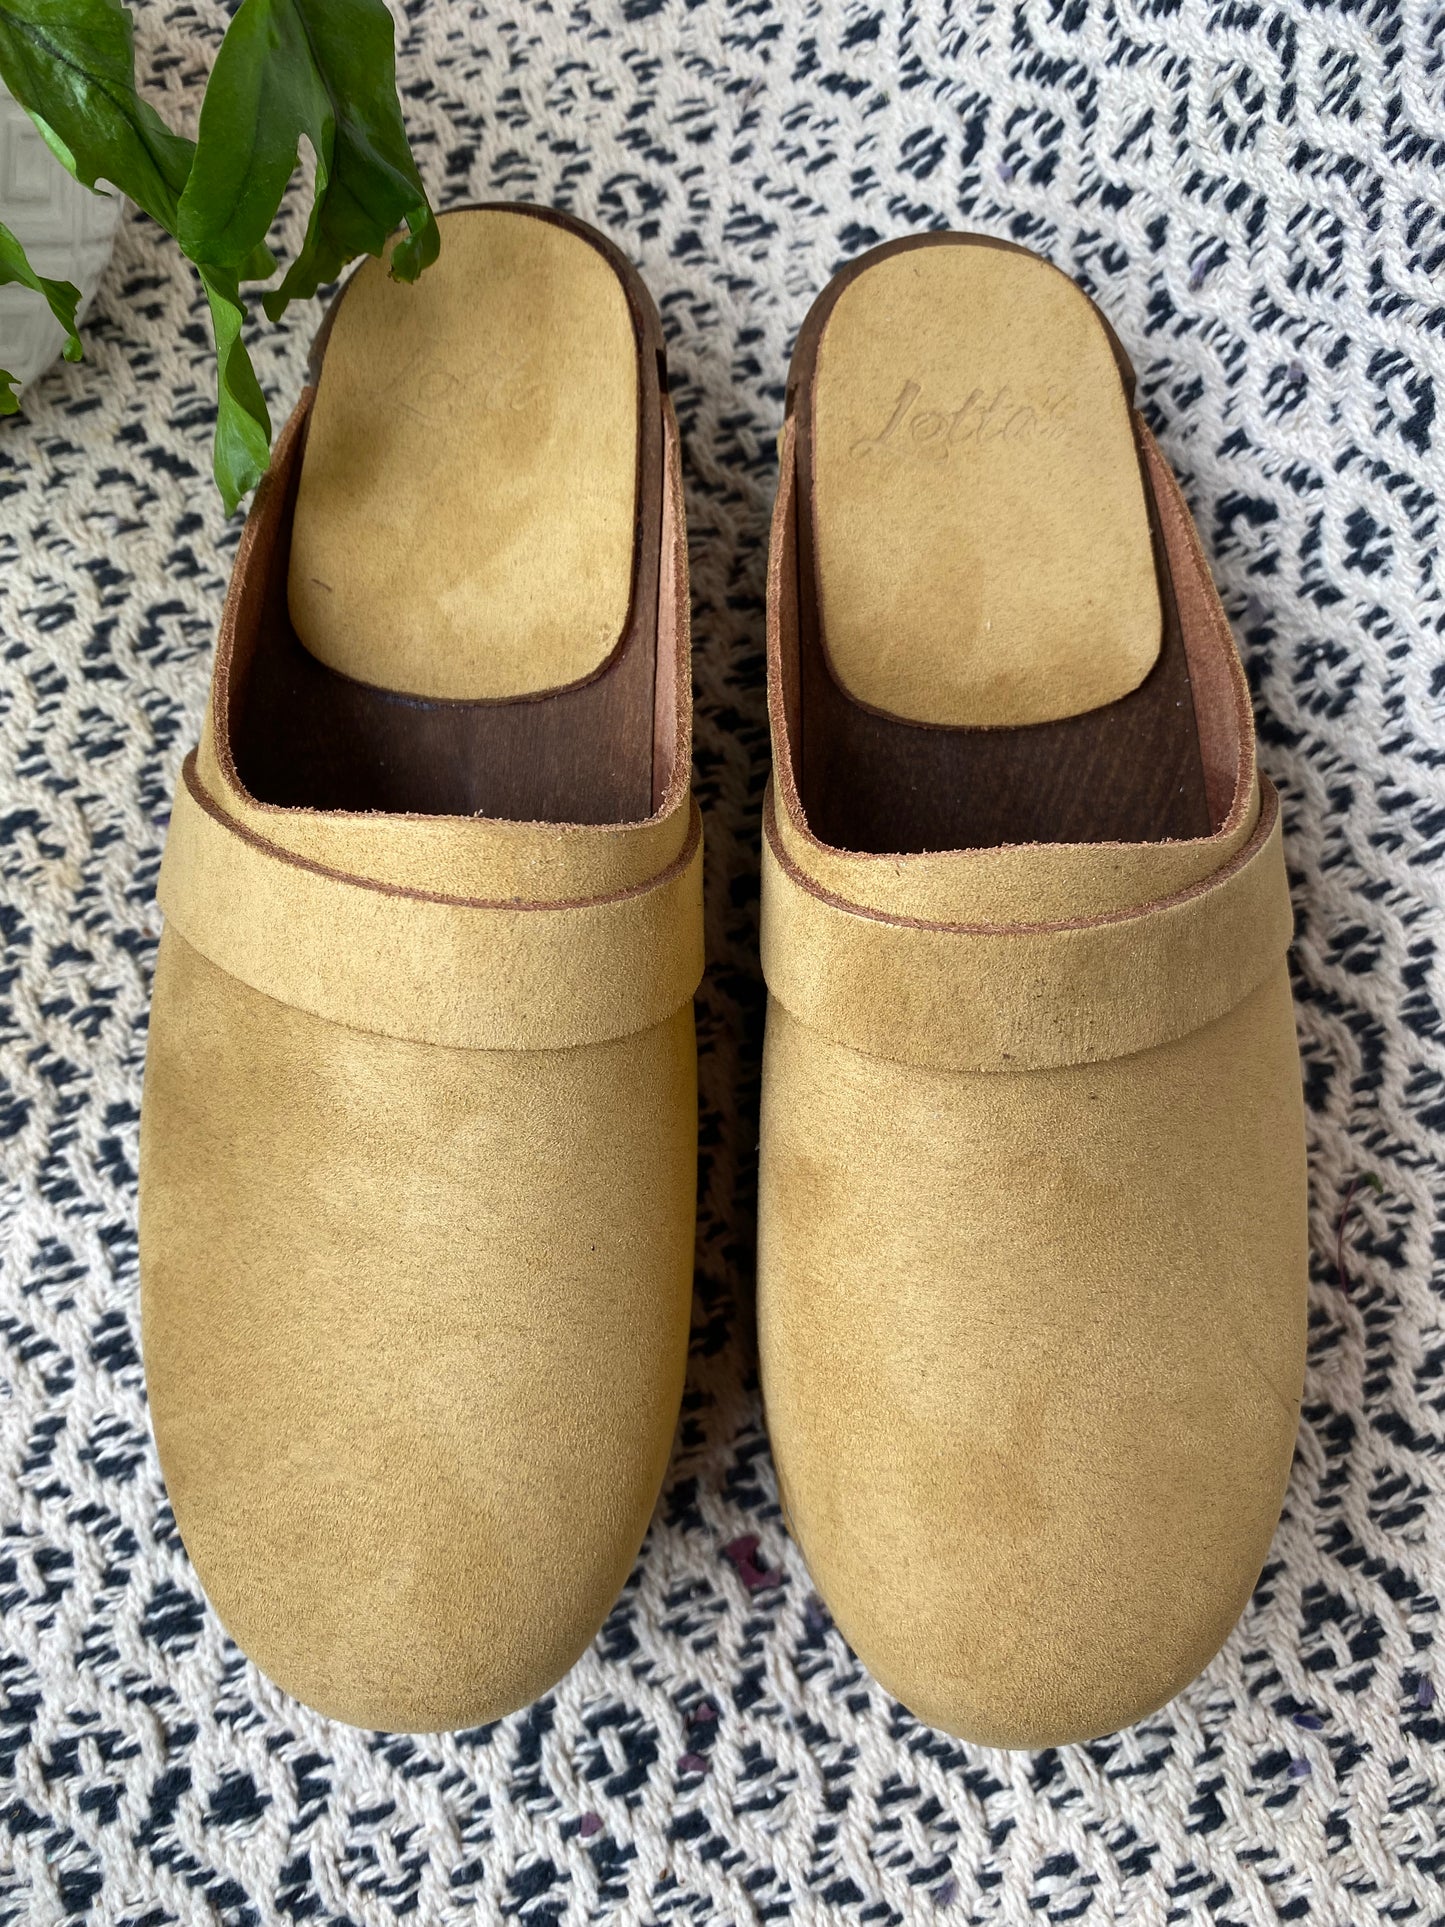 Elsa Classic Clogs in Sand StainResist. Nubuck on Brown Base